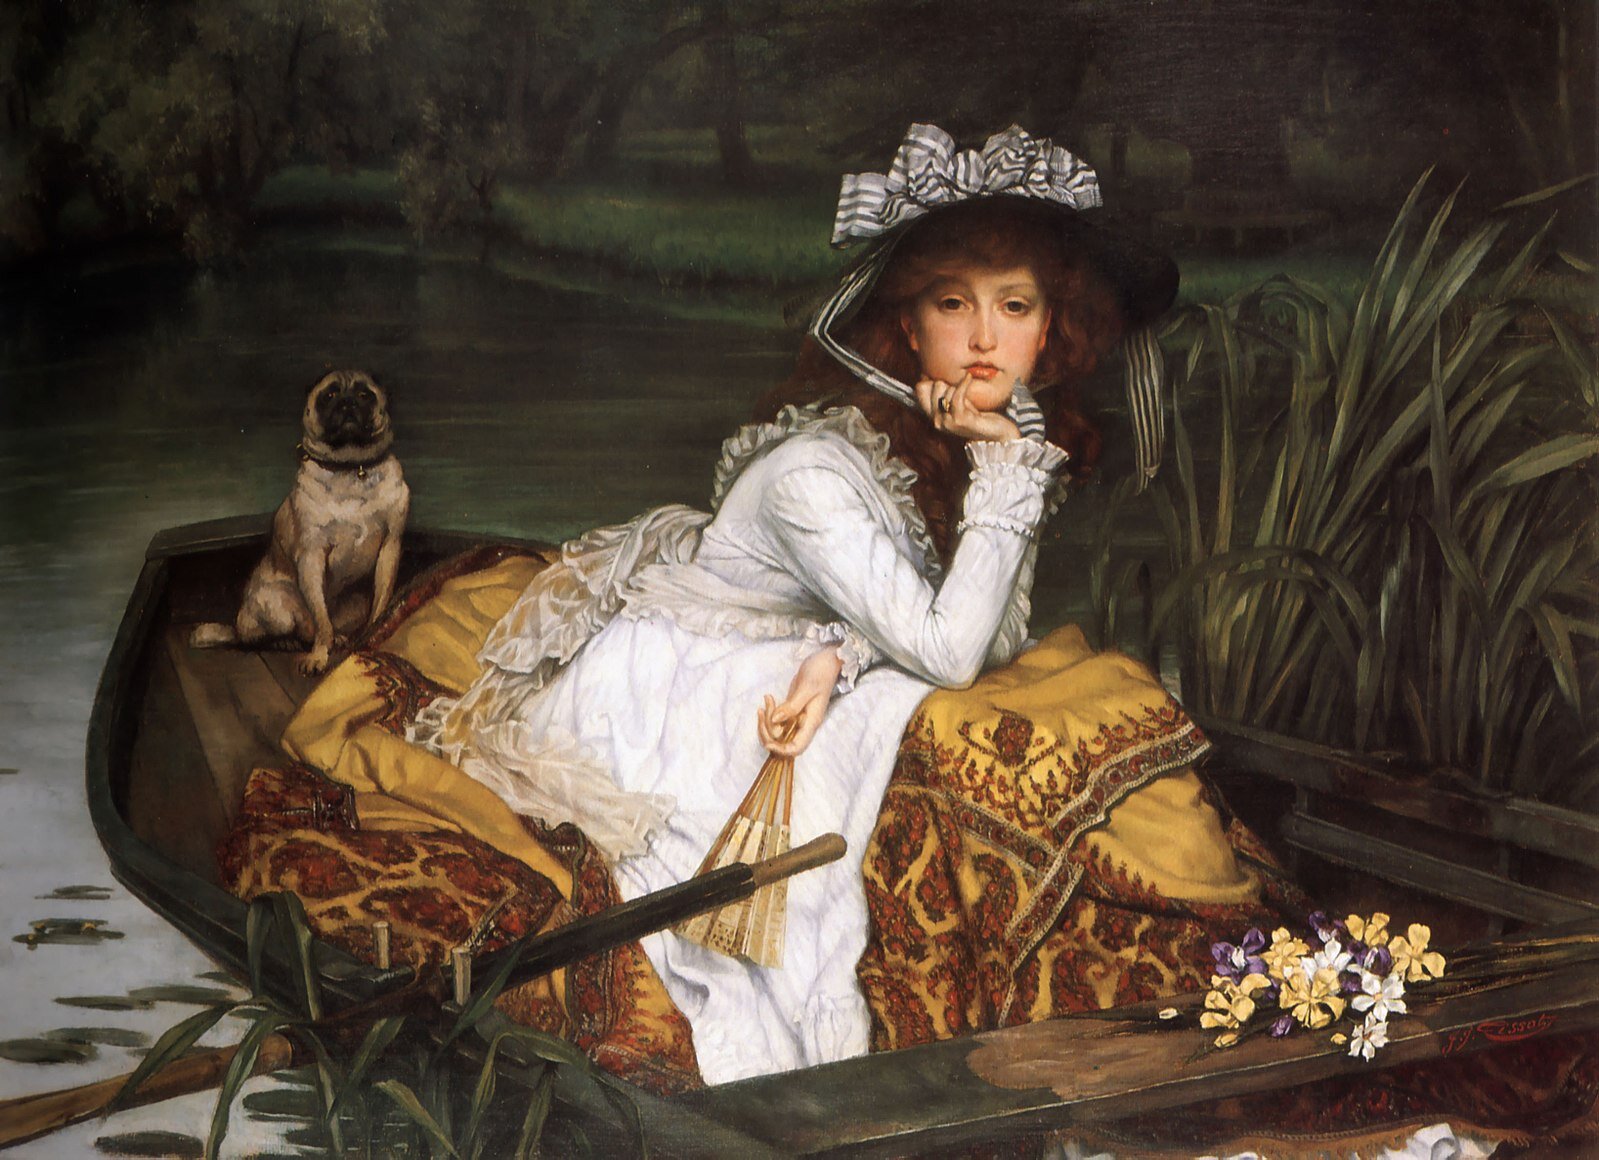 James Tissot - Young Lady in a Boat, 1870